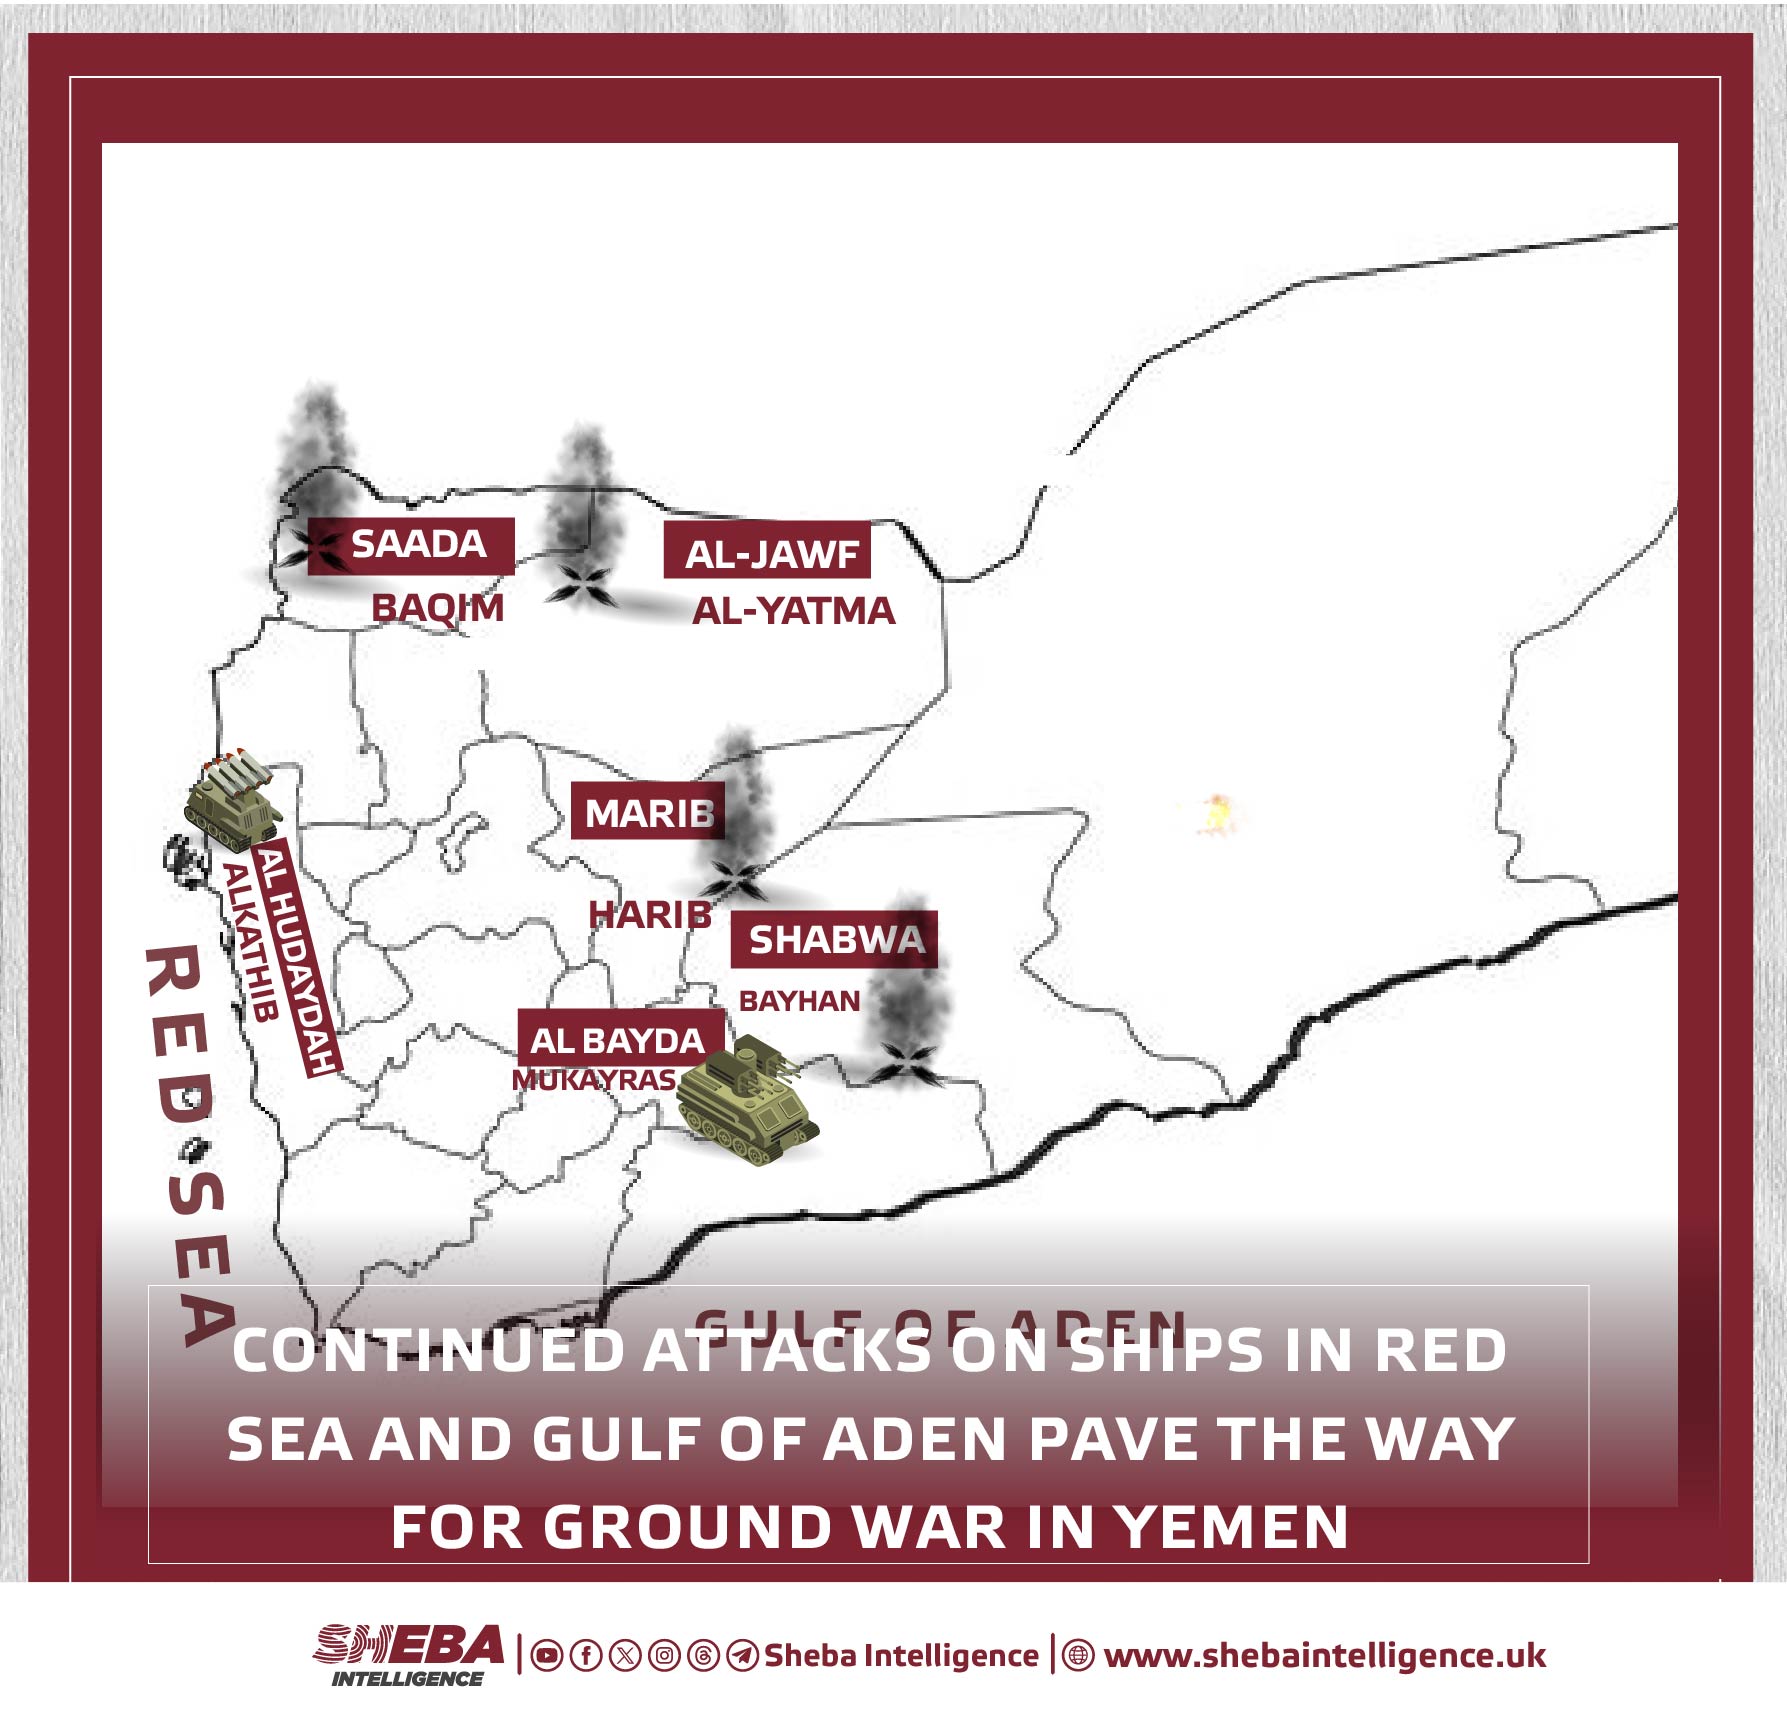 Continued Attacks on Ships in Red Sea and Gulf of Aden Pave the Way for Ground War in Yemen